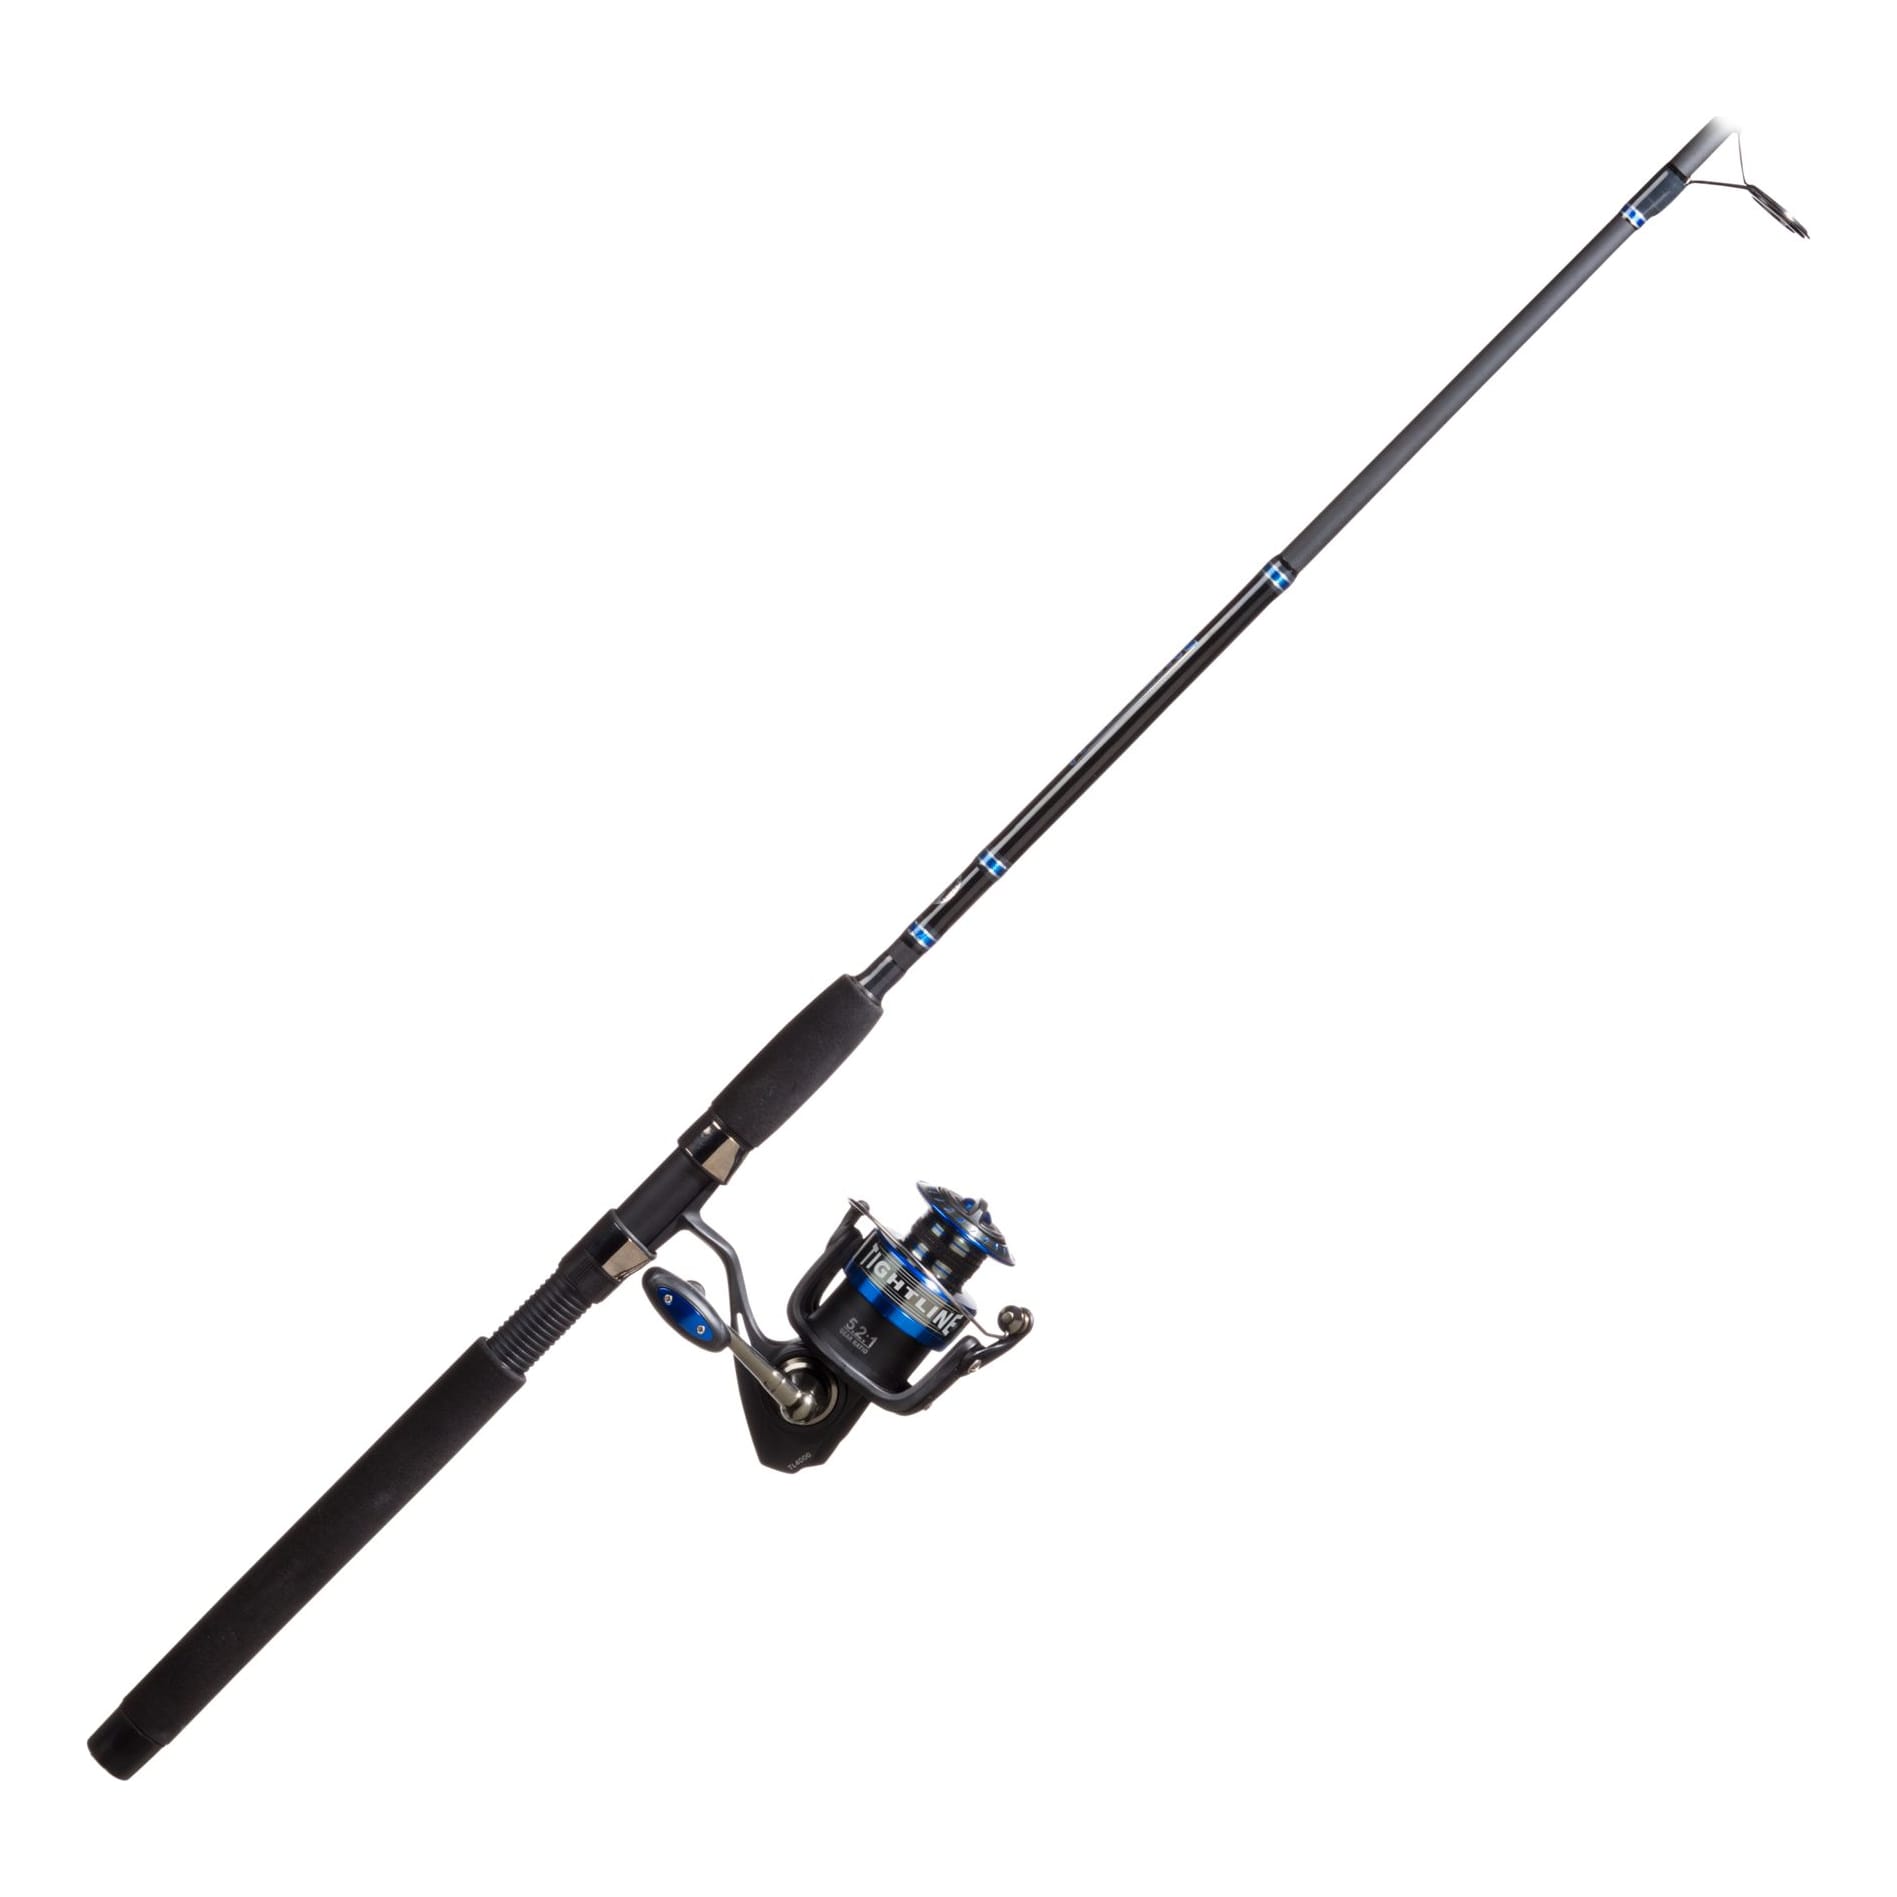 Offshore Angler Tightline Spinning Rod And Reel Combo - Cabelas 